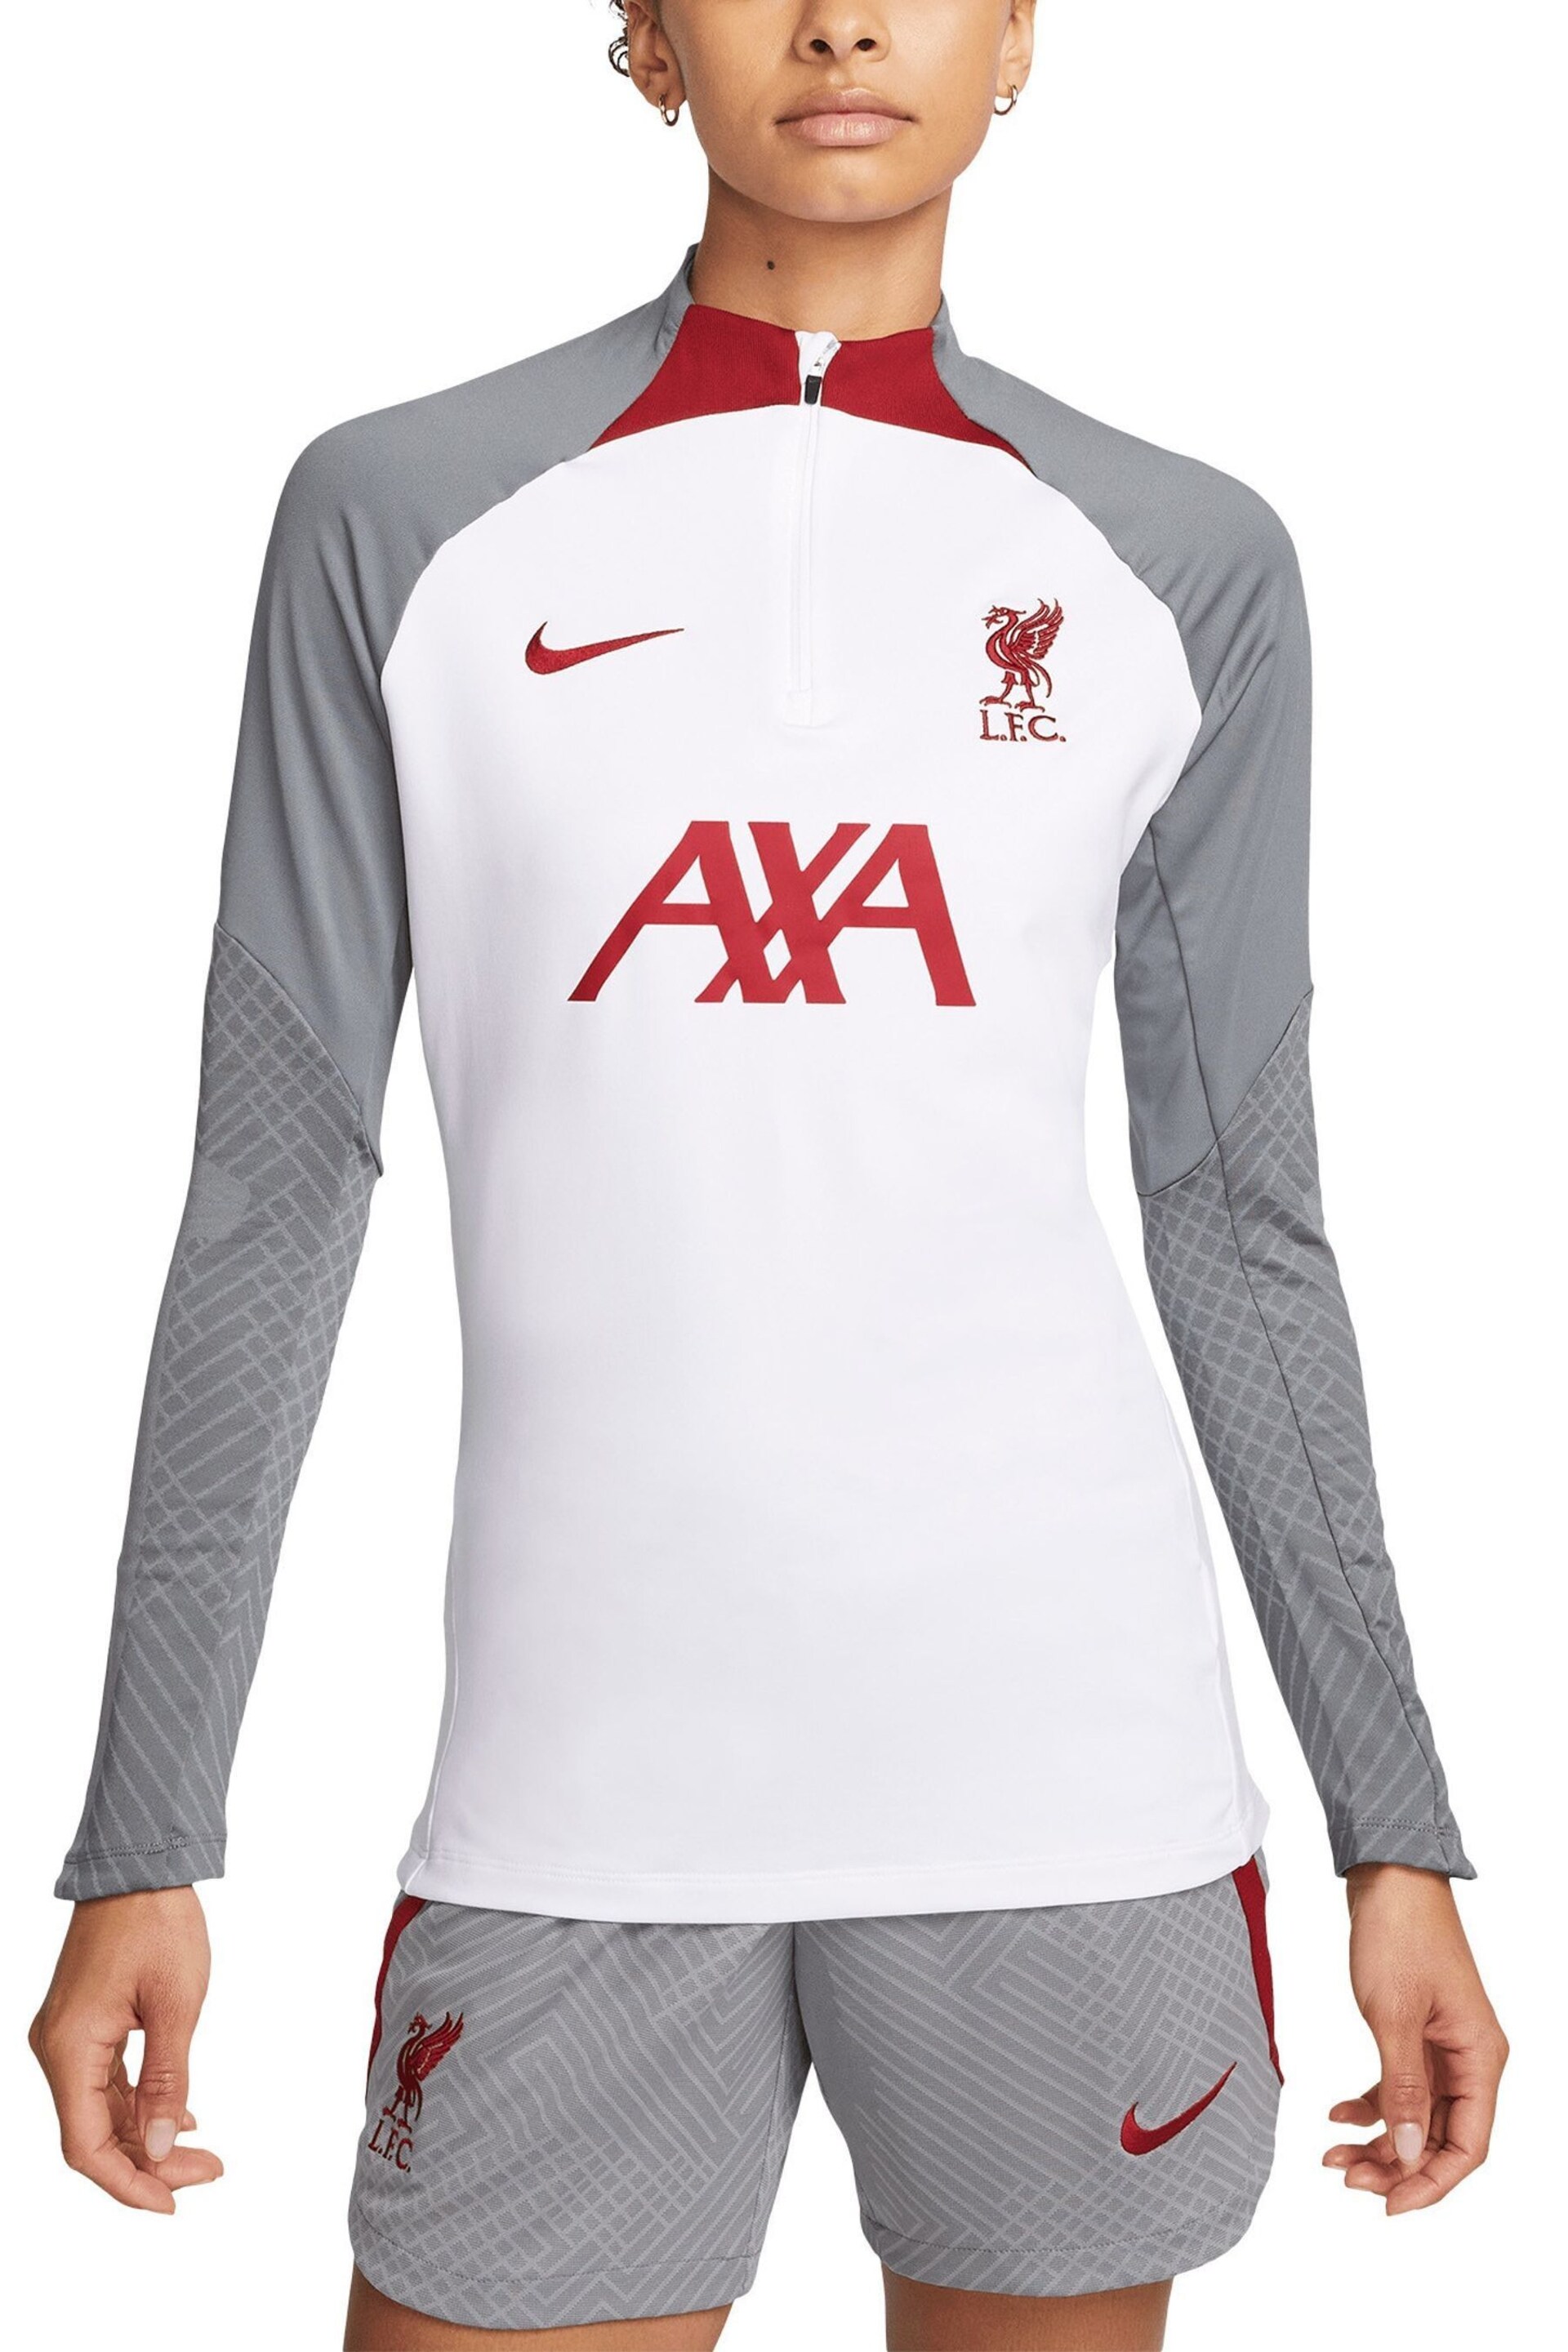 Nike White Liverpool Strike Drill Top Womens - Image 1 of 2